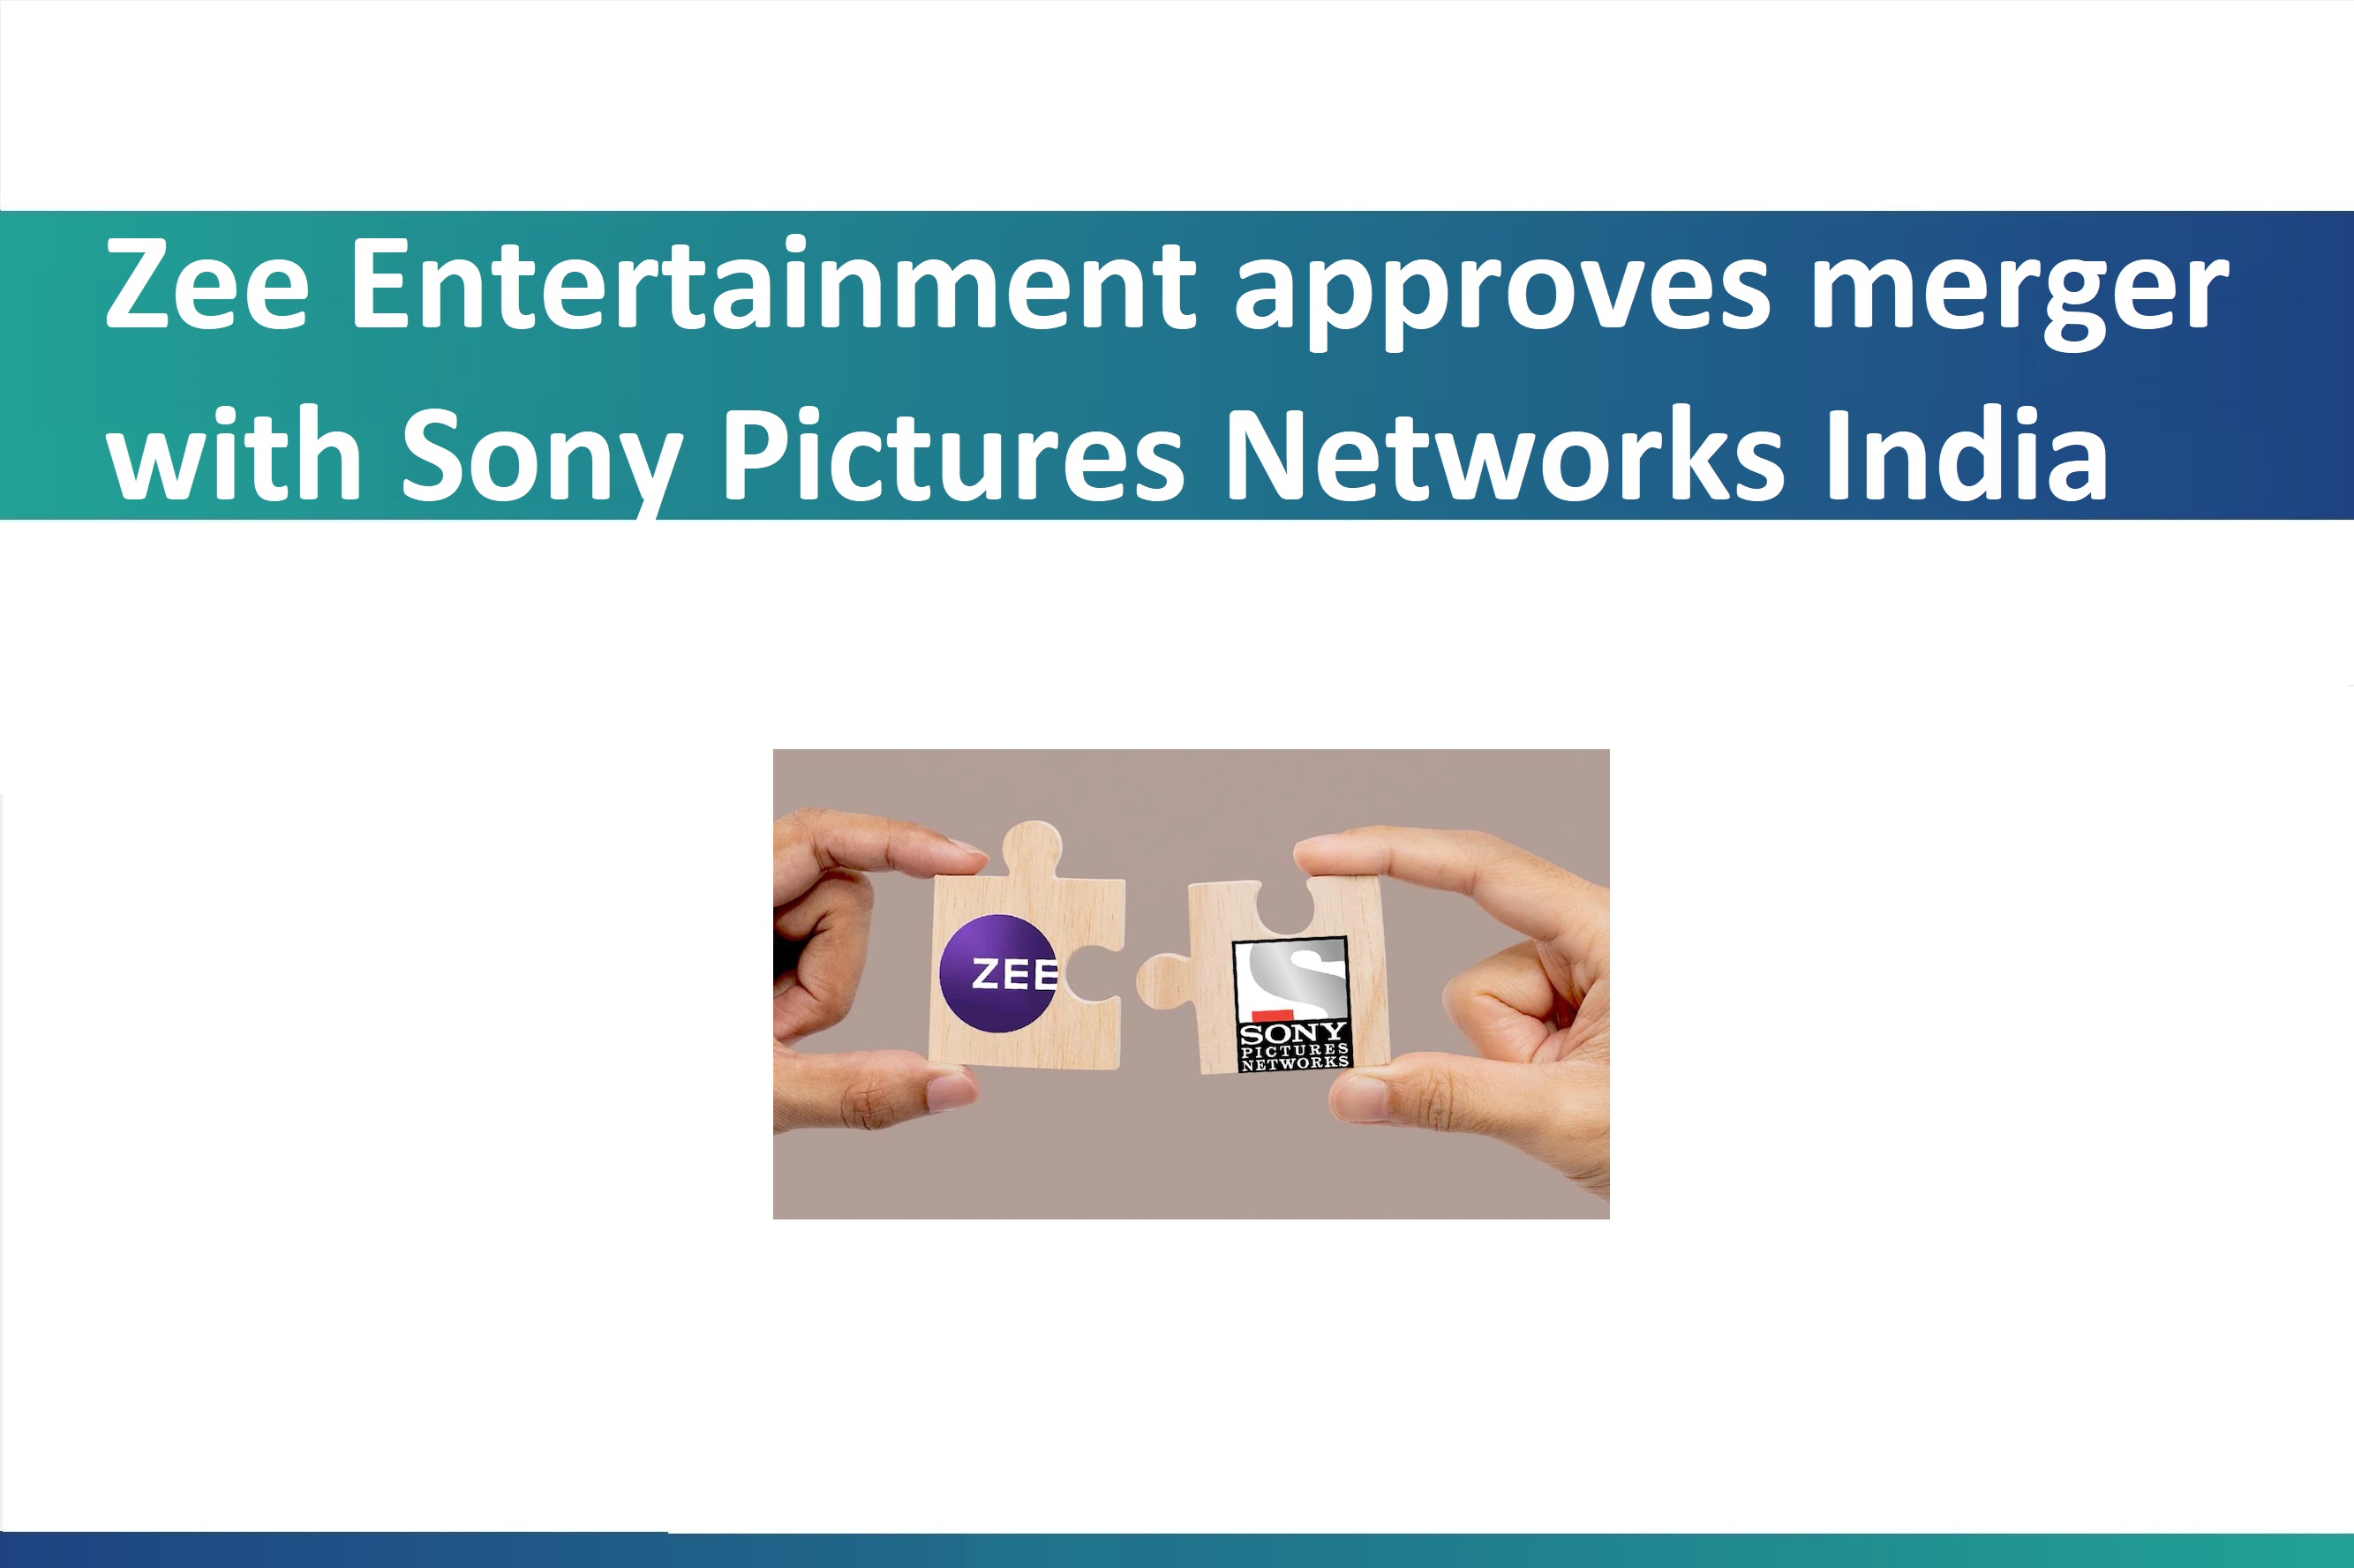 Zee Entertainment approves merger with Sony Pictures Networks India